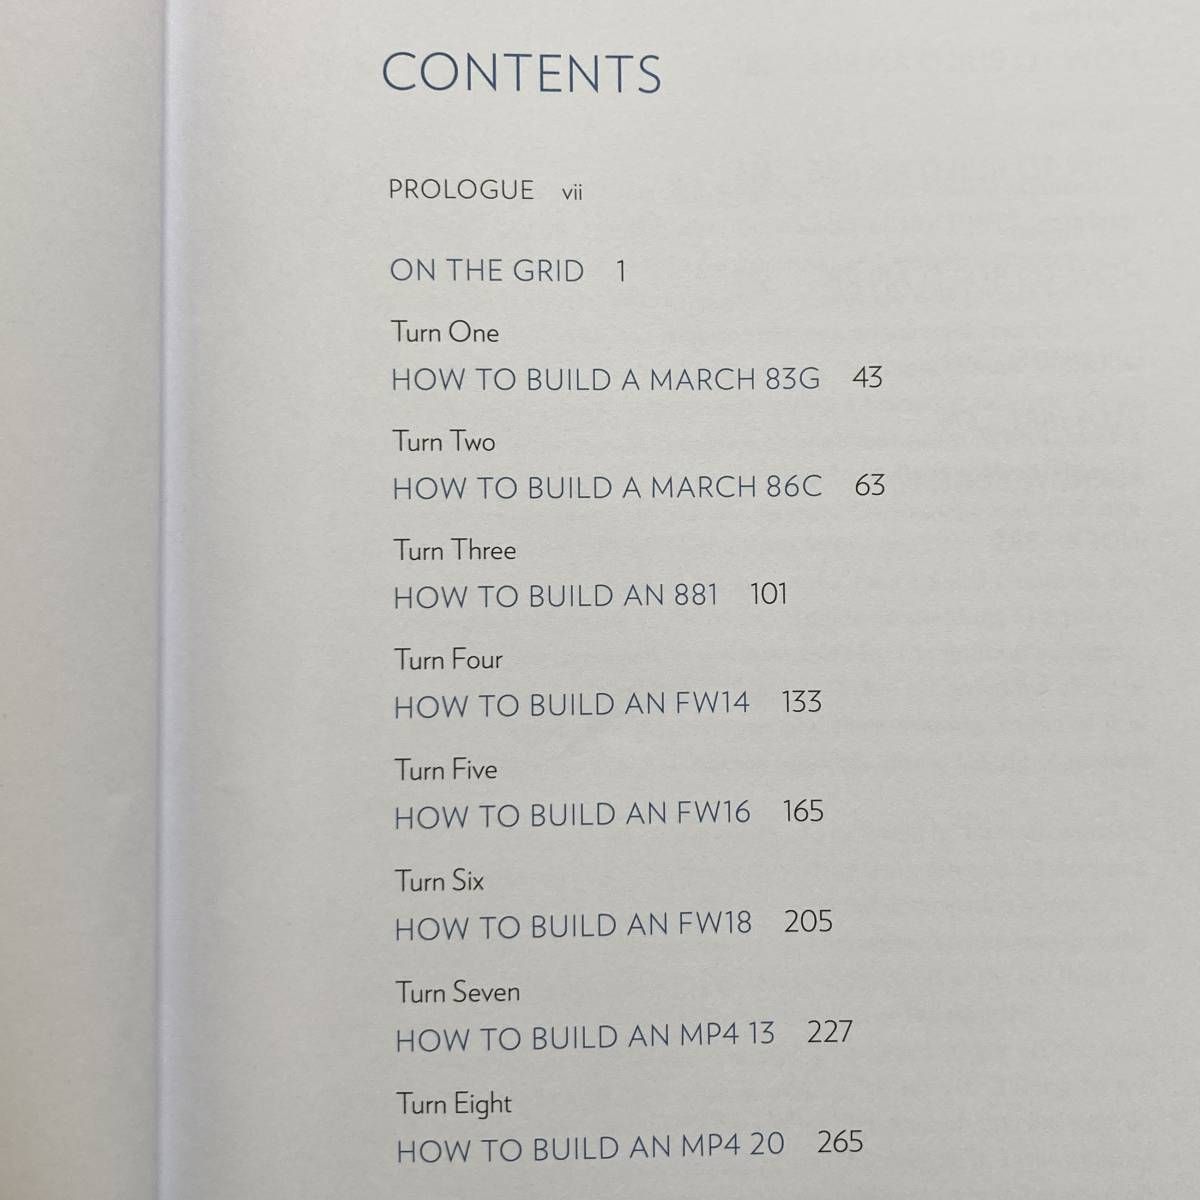 Newey's creativity slept when book parts and all 77 chapters were named